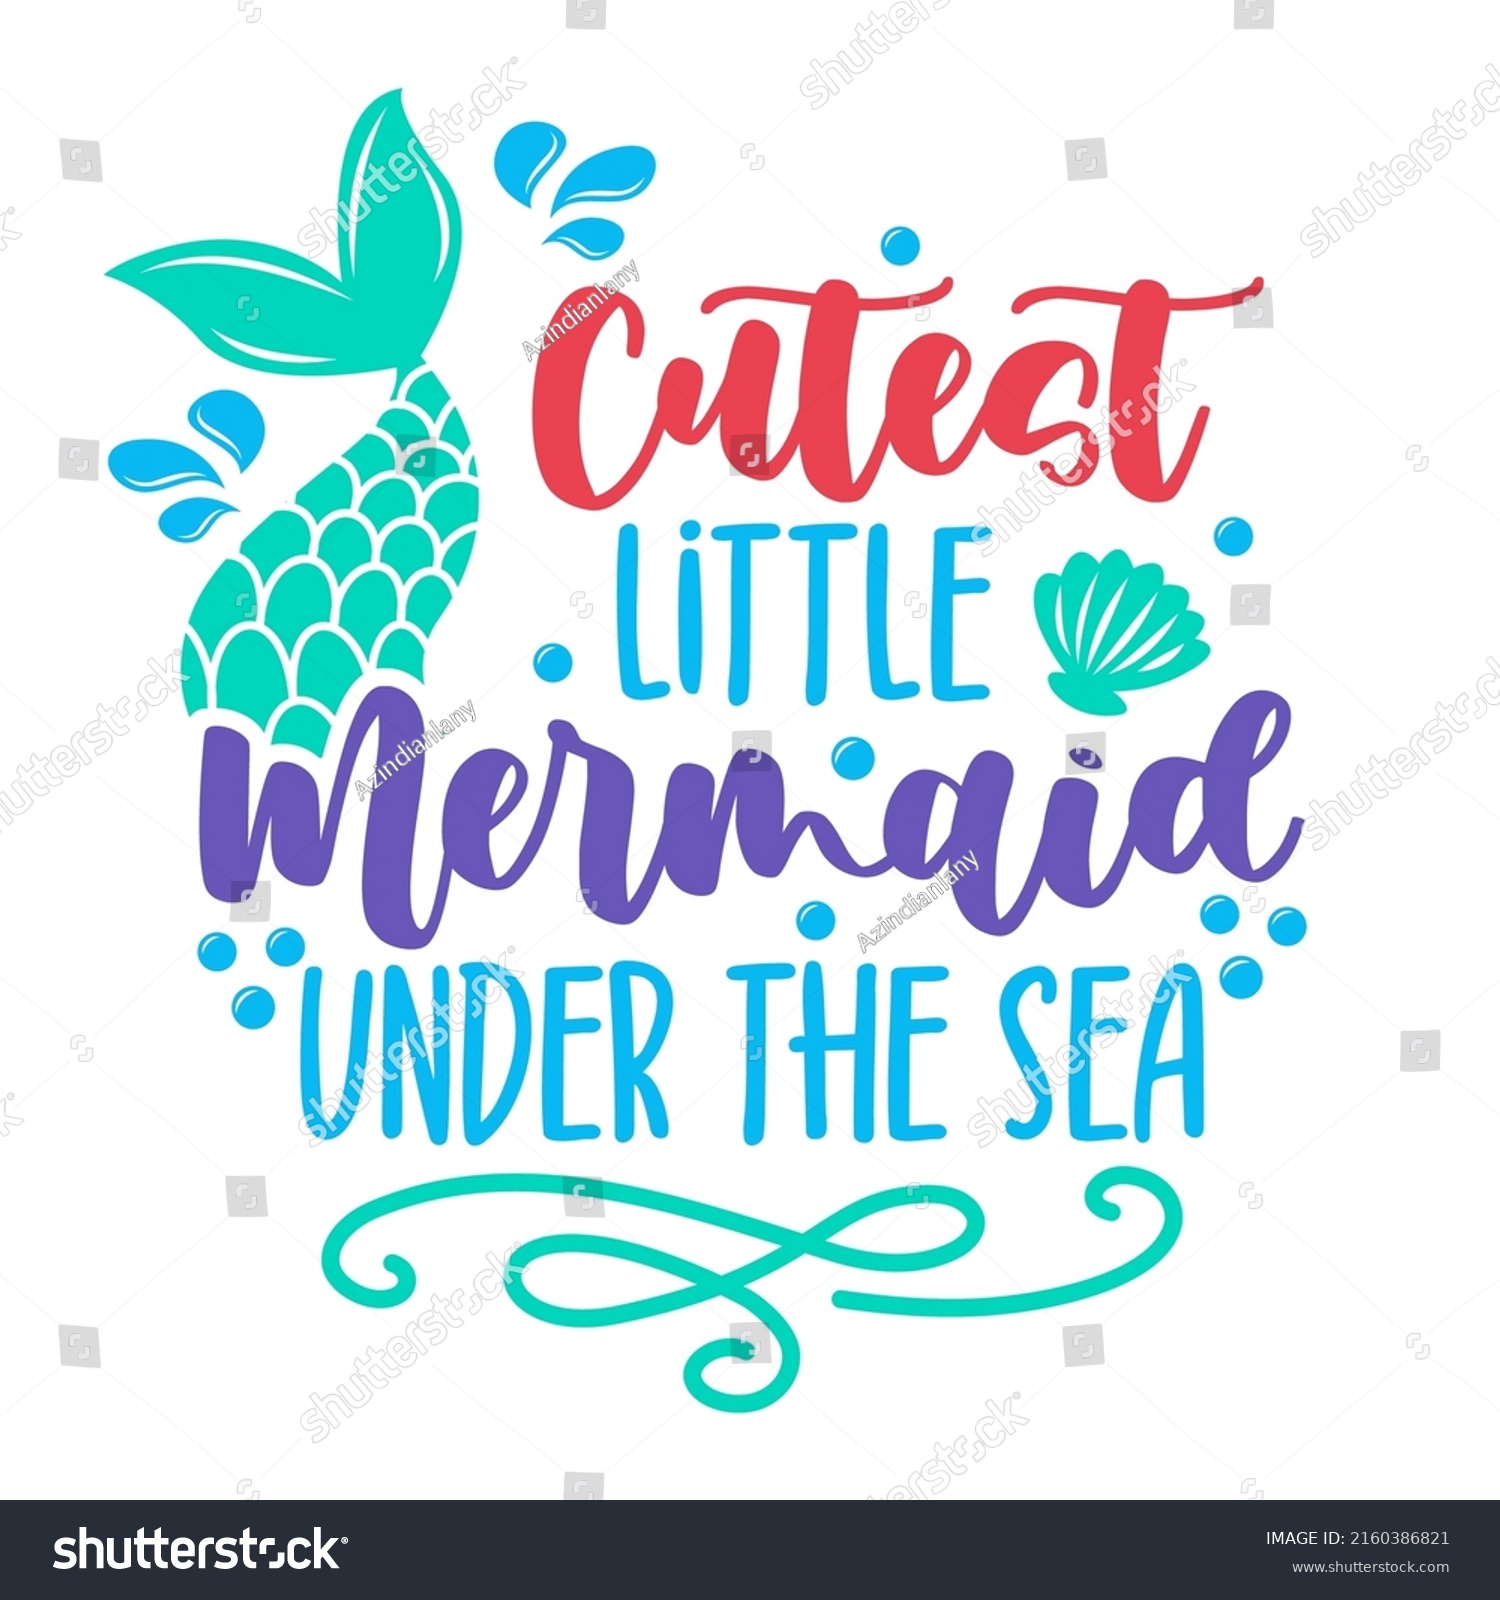 SVG of Cutest little Mermaid under the sea - funny motivation fairy tale quotes. Handwritten stay hydrated lettering. Health care, workout, diet, water balance. Vector illustration, poster design, banner. svg